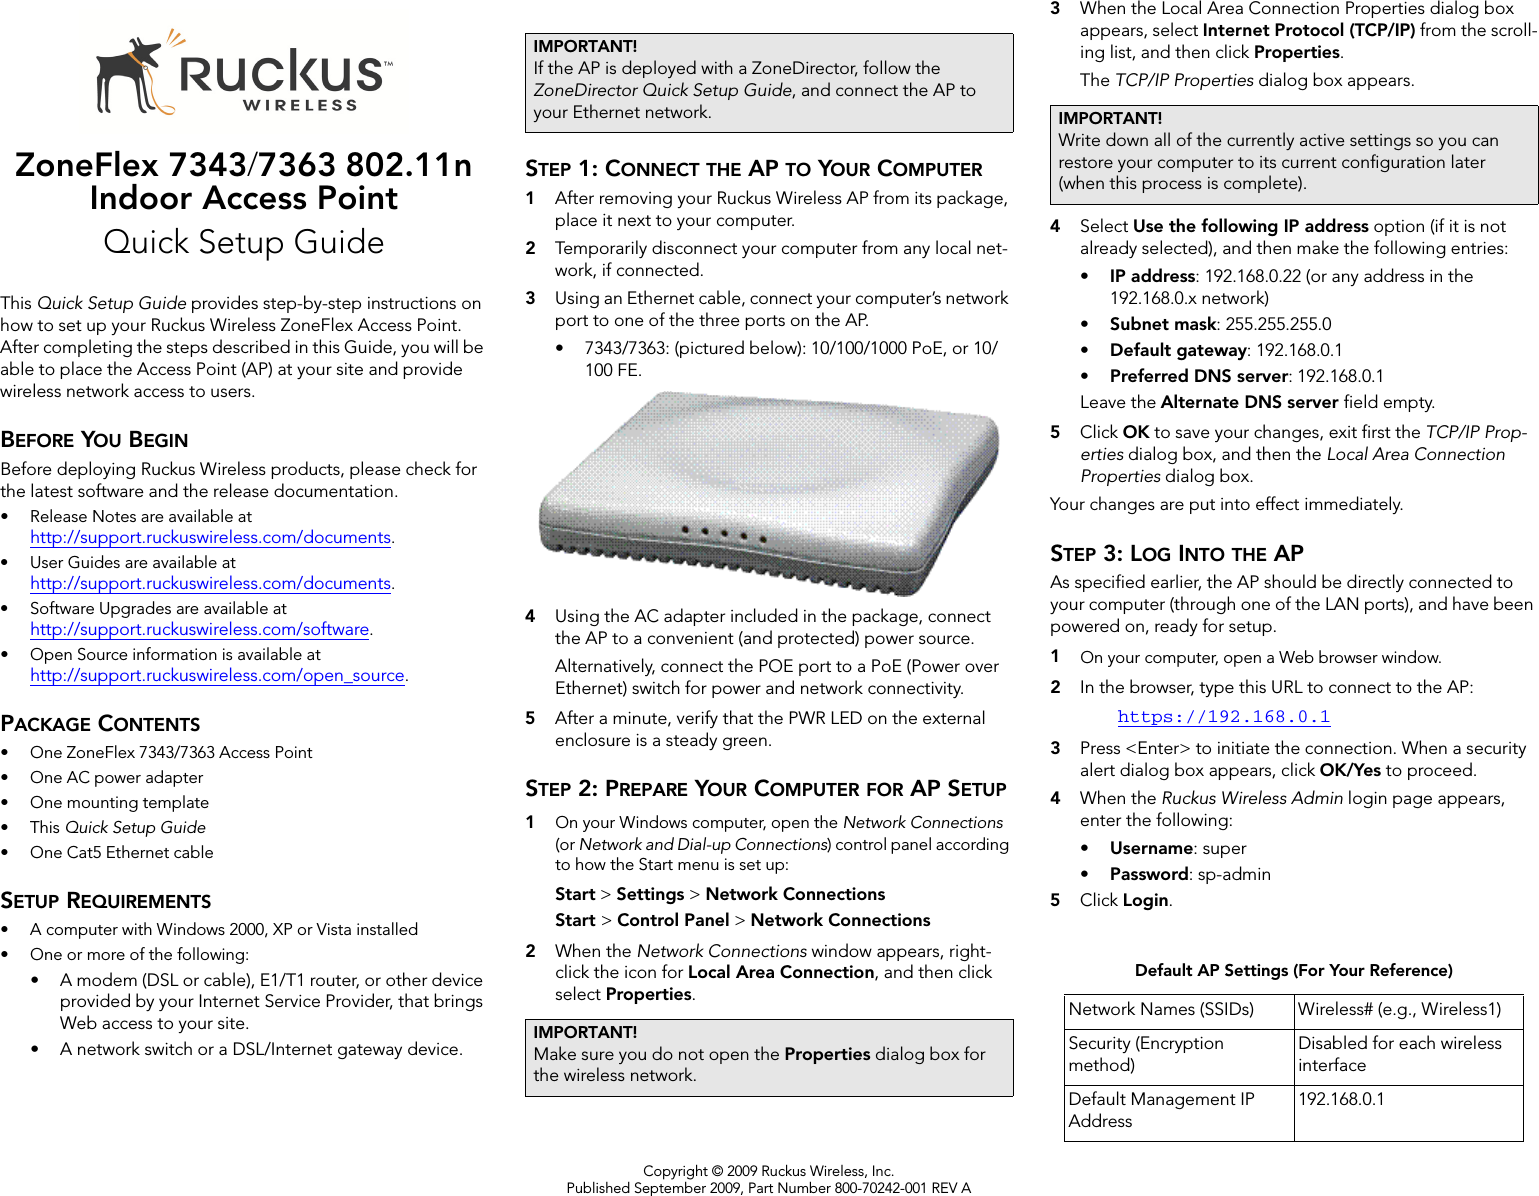 Copyright © 2009 Ruckus Wireless, Inc.Published September 2009, Part Number 800-70242-001 REV AZoneFlex 7343/7363 802.11n Indoor Access PointQuick Setup GuideThis Quick Setup Guide provides step-by-step instructions on how to set up your Ruckus Wireless ZoneFlex Access Point. After completing the steps described in this Guide, you will be able to place the Access Point (AP) at your site and provide wireless network access to users.BEFORE YOU BEGINBefore deploying Ruckus Wireless products, please check for the latest software and the release documentation.• Release Notes are available at http://support.ruckuswireless.com/documents.• User Guides are available at http://support.ruckuswireless.com/documents.• Software Upgrades are available athttp://support.ruckuswireless.com/software.• Open Source information is available athttp://support.ruckuswireless.com/open_source.PACKAGE CONTENTS• One ZoneFlex 7343/7363 Access Point• One AC power adapter• One mounting template•This Quick Setup Guide• One Cat5 Ethernet cableSETUP REQUIREMENTS• A computer with Windows 2000, XP or Vista installed• One or more of the following:• A modem (DSL or cable), E1/T1 router, or other device provided by your Internet Service Provider, that brings Web access to your site. • A network switch or a DSL/Internet gateway device. STEP 1: CONNECT THE AP TO YOUR COMPUTER1After removing your Ruckus Wireless AP from its package, place it next to your computer.2Temporarily disconnect your computer from any local net-work, if connected.3Using an Ethernet cable, connect your computer’s network port to one of the three ports on the AP. • 7343/7363: (pictured below): 10/100/1000 PoE, or 10/100 FE.4Using the AC adapter included in the package, connect the AP to a convenient (and protected) power source. Alternatively, connect the POE port to a PoE (Power over Ethernet) switch for power and network connectivity.5After a minute, verify that the PWR LED on the external enclosure is a steady green. STEP 2: PREPARE YOUR COMPUTER FOR AP SETUP1On your Windows computer, open the Network Connections (or Network and Dial-up Connections) control panel according to how the Start menu is set up: Start &gt; Settings &gt; Network ConnectionsStart &gt; Control Panel &gt; Network Connections2When the Network Connections window appears, right-click the icon for Local Area Connection, and then click select Properties.3When the Local Area Connection Properties dialog box appears, select Internet Protocol (TCP/IP) from the scroll-ing list, and then click Properties. The TCP/IP Properties dialog box appears.4Select Use the following IP address option (if it is not already selected), and then make the following entries:•IP address: 192.168.0.22 (or any address in the 192.168.0.x network)•Subnet mask: 255.255.255.0•Default gateway: 192.168.0.1•Preferred DNS server: 192.168.0.1Leave the Alternate DNS server field empty.5Click OK to save your changes, exit first the TCP/IP Prop-erties dialog box, and then the Local Area Connection Properties dialog box. Your changes are put into effect immediately. STEP 3: LOG INTO THE APAs specified earlier, the AP should be directly connected to your computer (through one of the LAN ports), and have been powered on, ready for setup.1On your computer, open a Web browser window.2In the browser, type this URL to connect to the AP: https://192.168.0.13Press &lt;Enter&gt; to initiate the connection. When a security alert dialog box appears, click OK/Yes to proceed.4When the Ruckus Wireless Admin login page appears, enter the following: •Username: super•Password: sp-admin5Click Login.IMPORTANT!If the AP is deployed with a ZoneDirector, follow the ZoneDirector Quick Setup Guide, and connect the AP to your Ethernet network.IMPORTANT!Make sure you do not open the Properties dialog box for the wireless network.IMPORTANT!Write down all of the currently active settings so you can restore your computer to its current configuration later (when this process is complete).Default AP Settings (For Your Reference)Network Names (SSIDs) Wireless# (e.g., Wireless1)Security (Encryption method)Disabled for each wireless interfaceDefault Management IP Address192.168.0.1